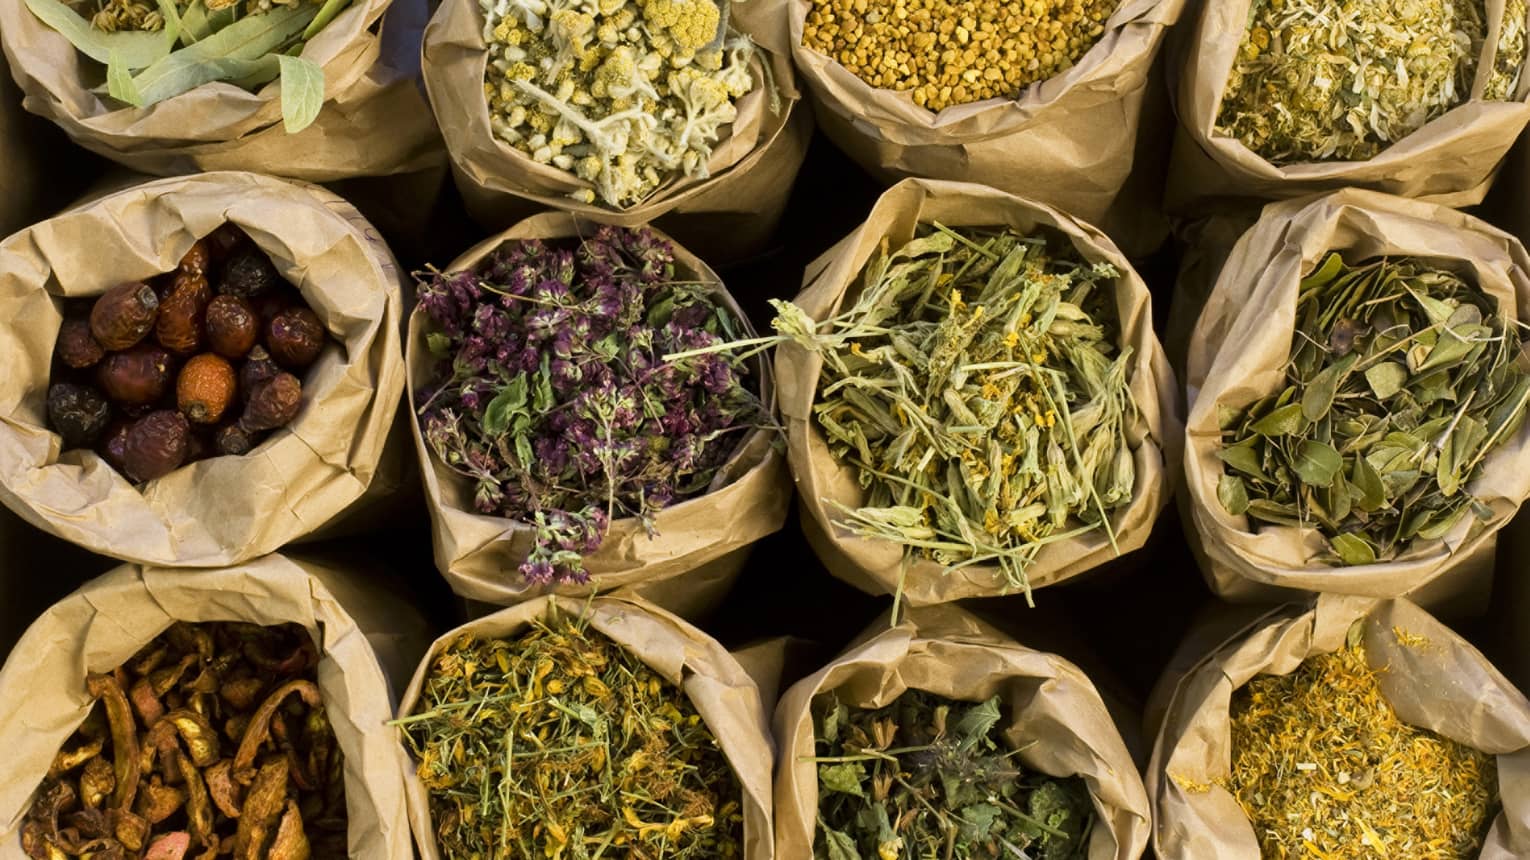 Bags are full of herbs, dried flowers, peppers and spices